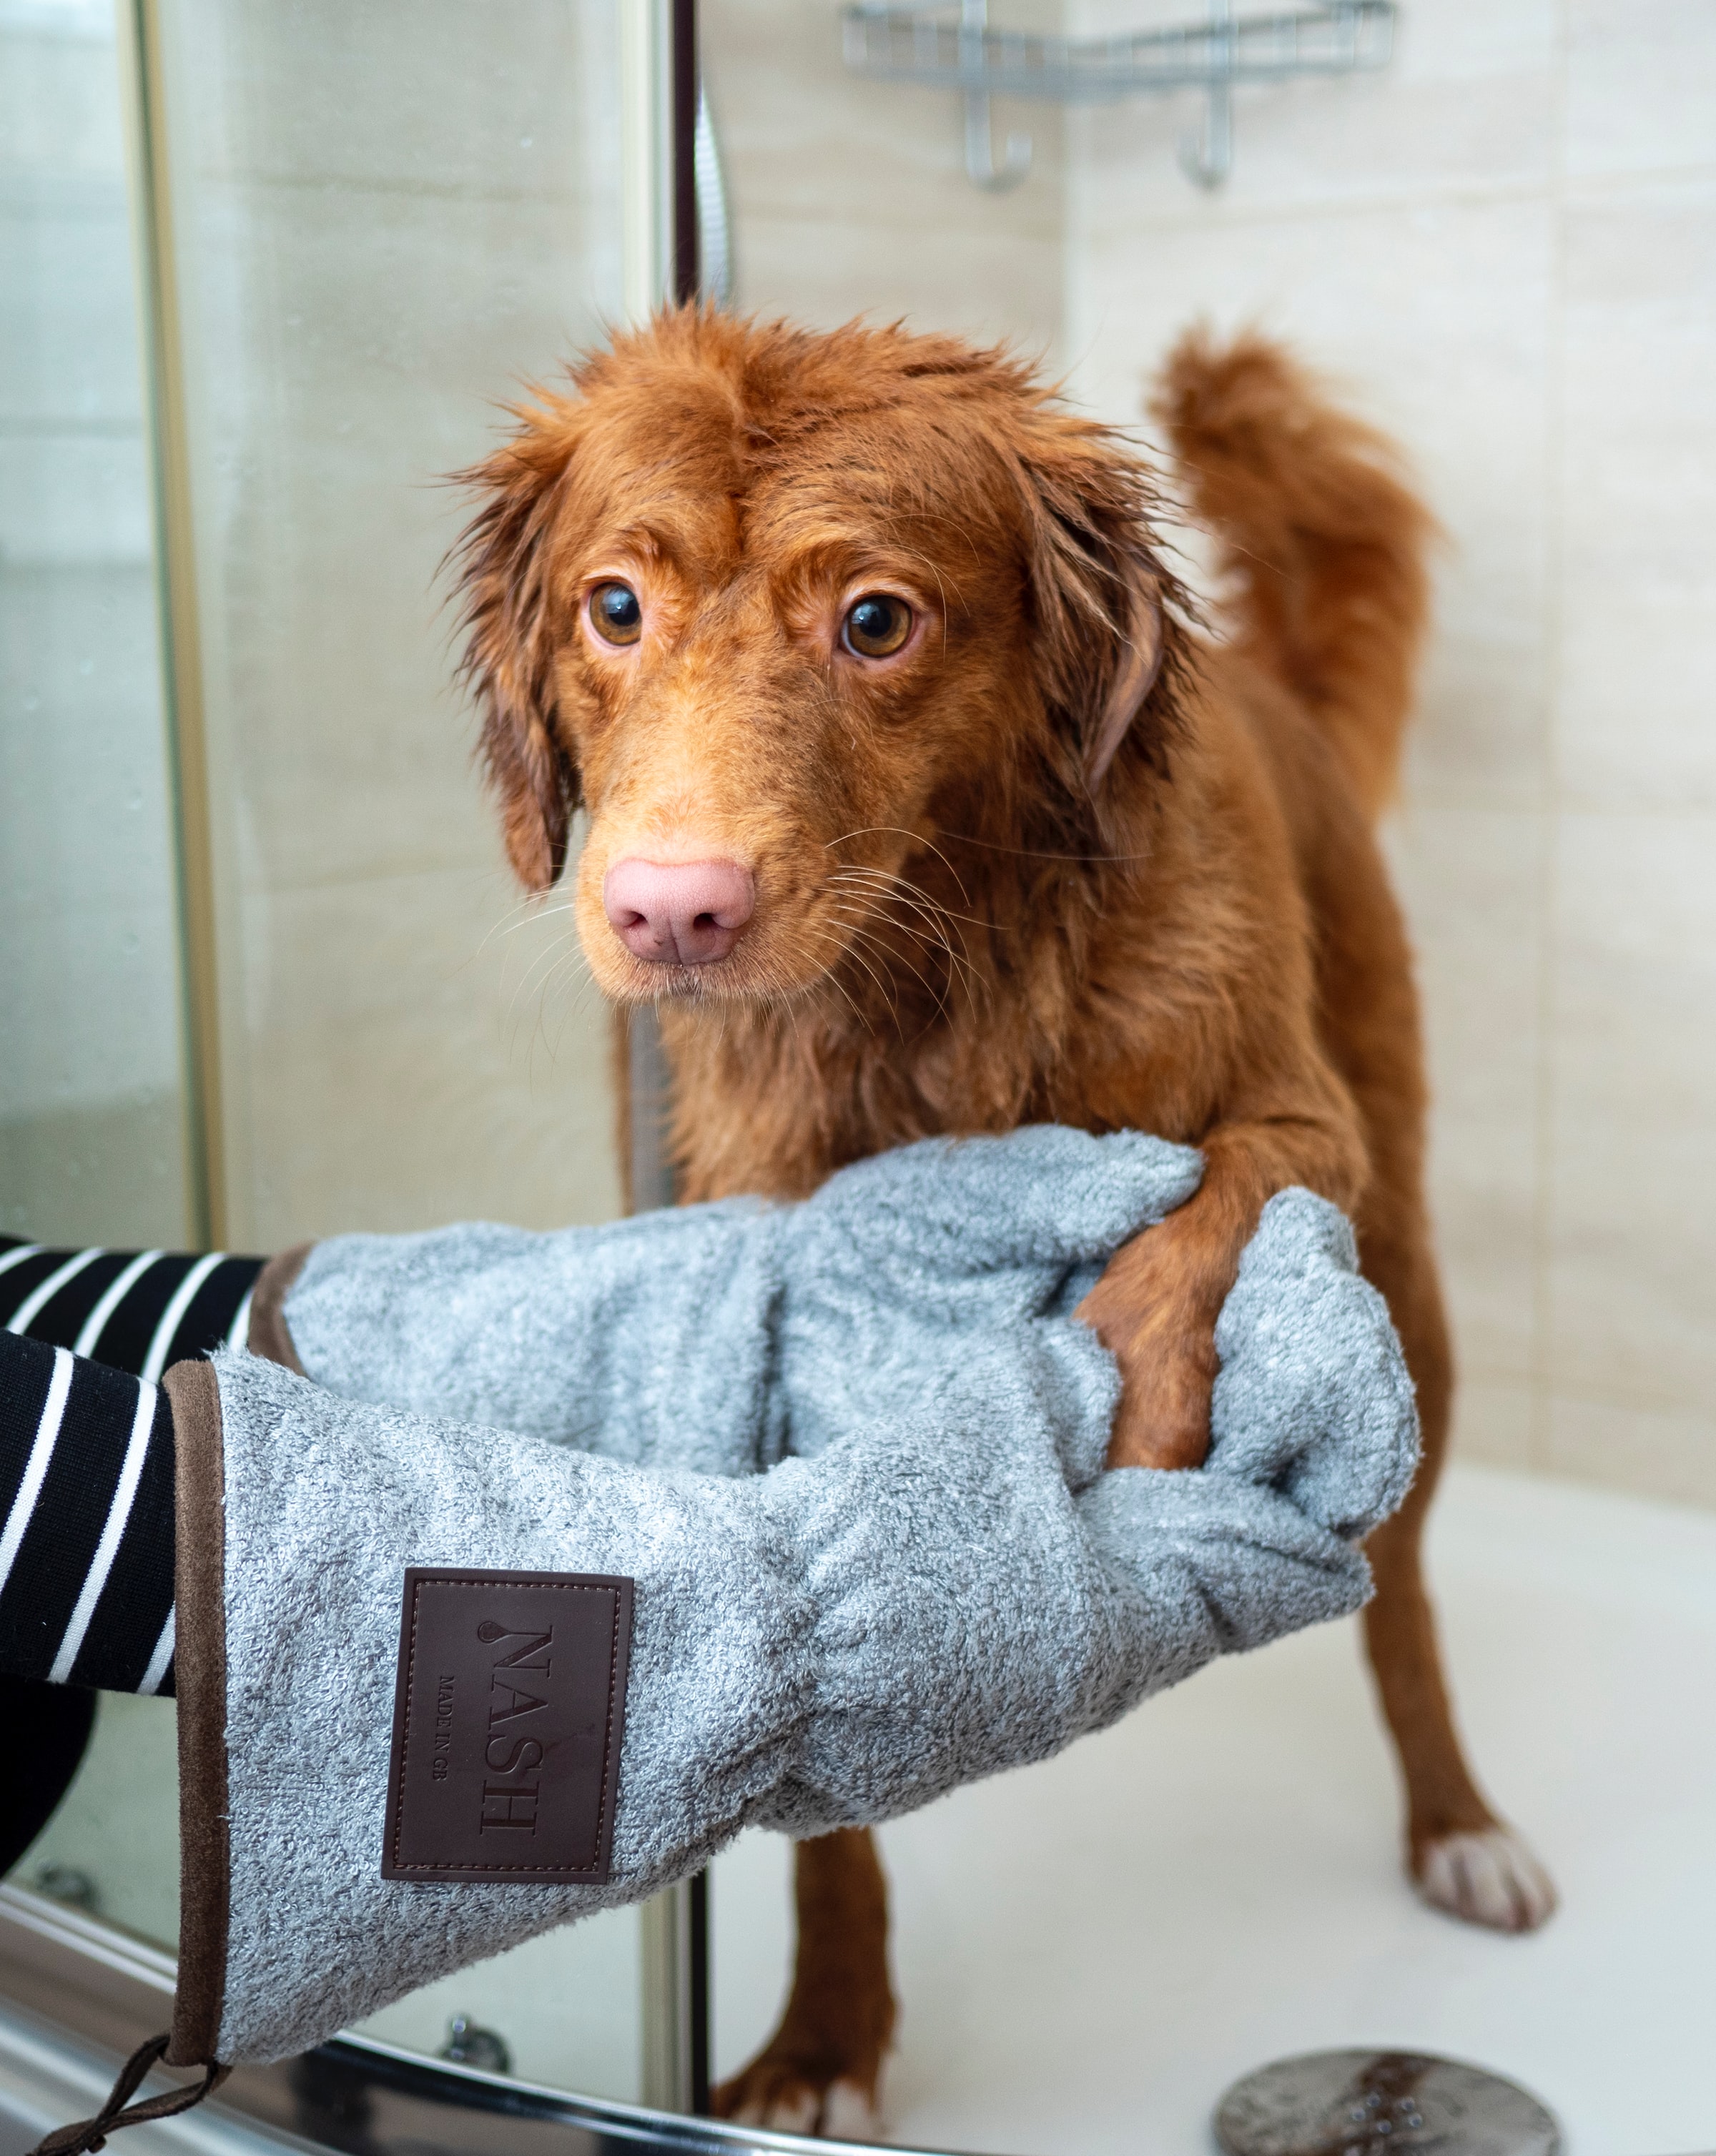 Dog Home Grooming - Pet being dried in shower